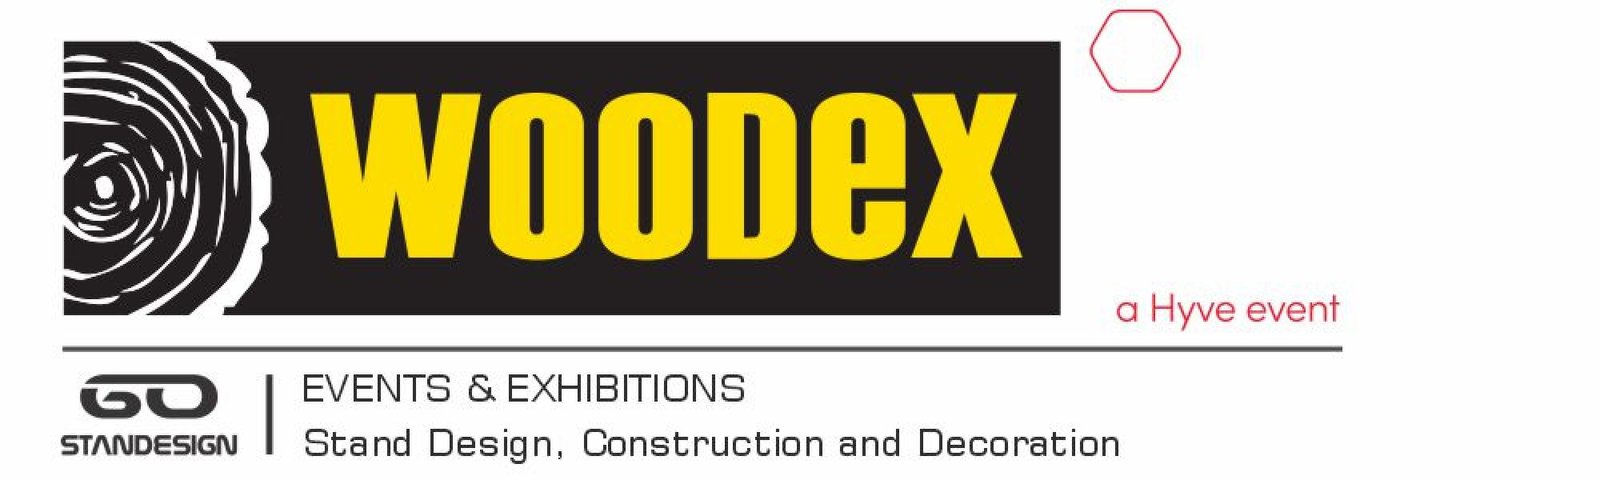 Woodex 2021 Exhibition Stand Services, Design, Construction and Decoration